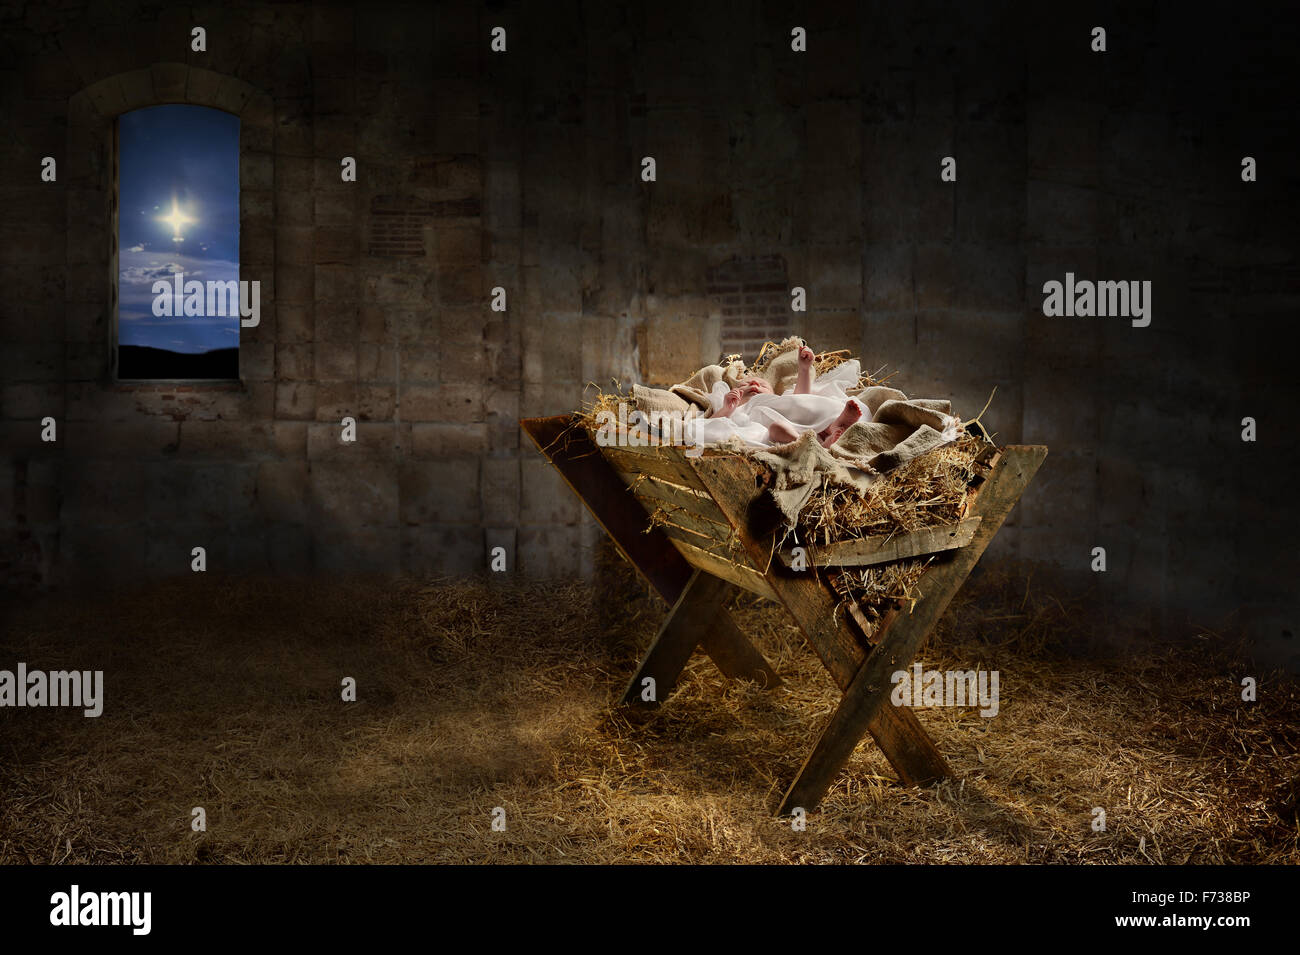 Jesus resting on a manger while light from the star filters into the room Stock Photo